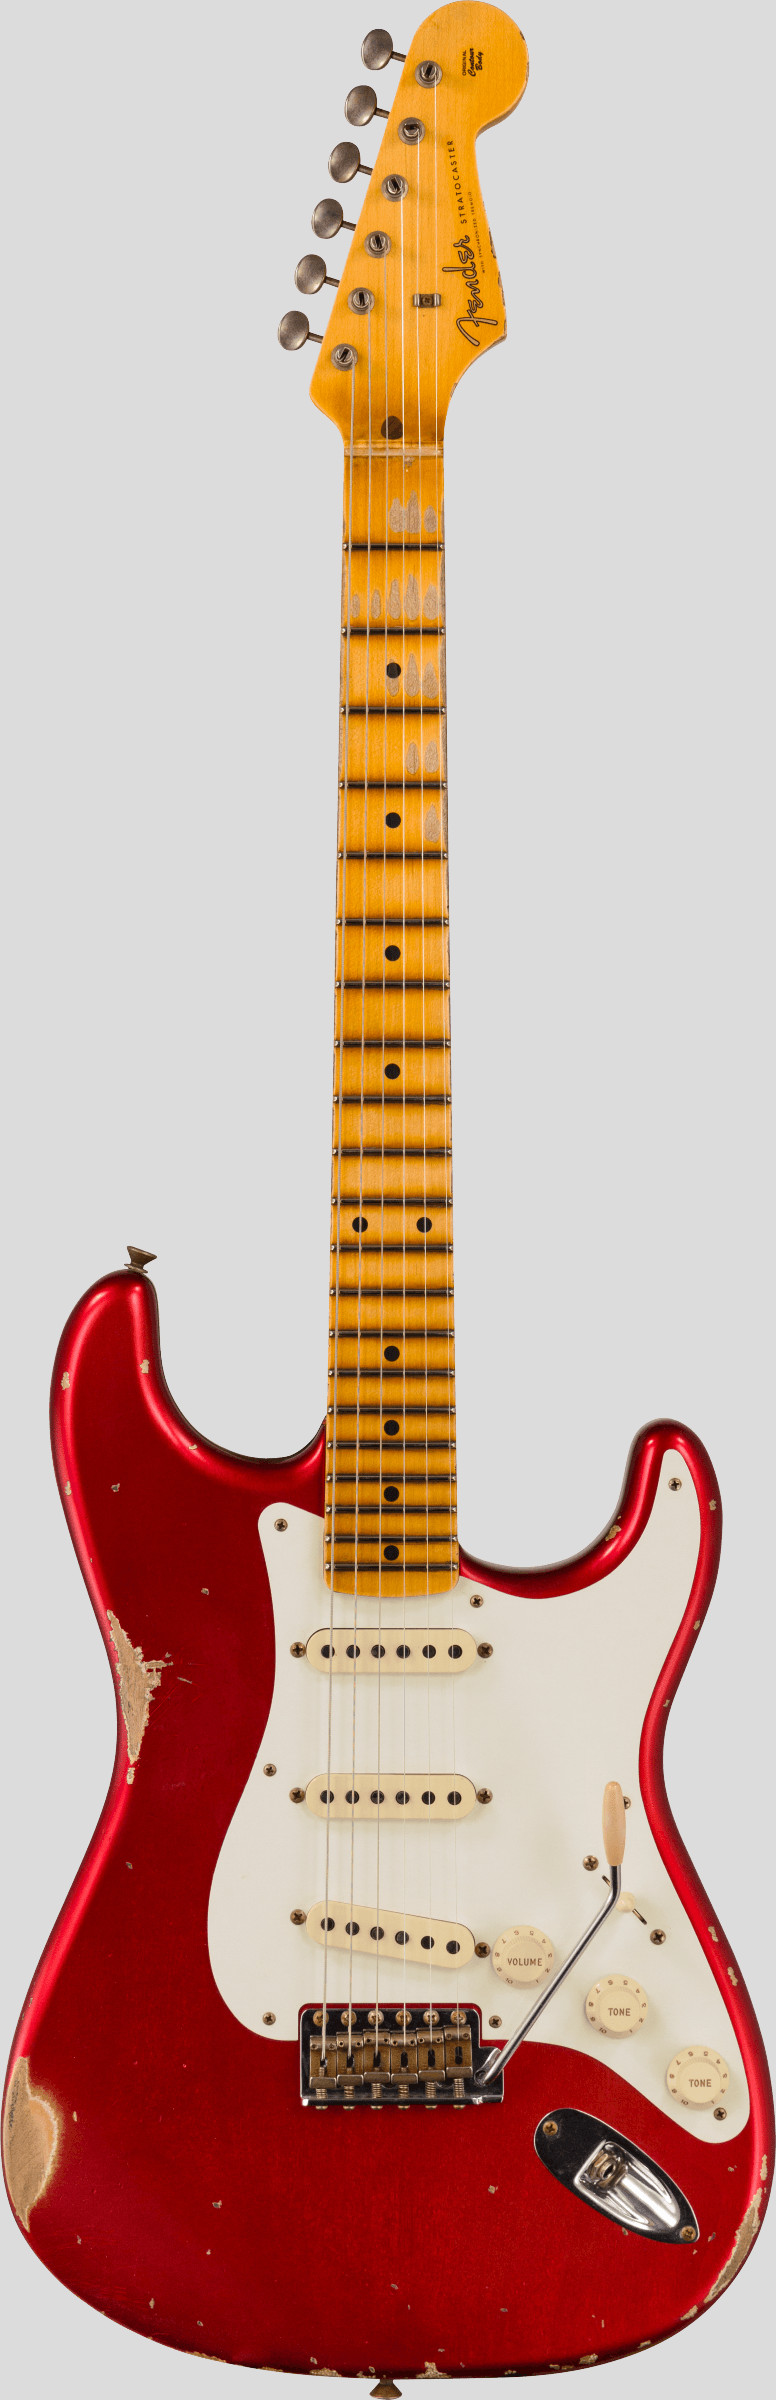 Fender Custom Shop Time Machine 58 Stratocaster Faded Aged Candy Apple Red Relic 1